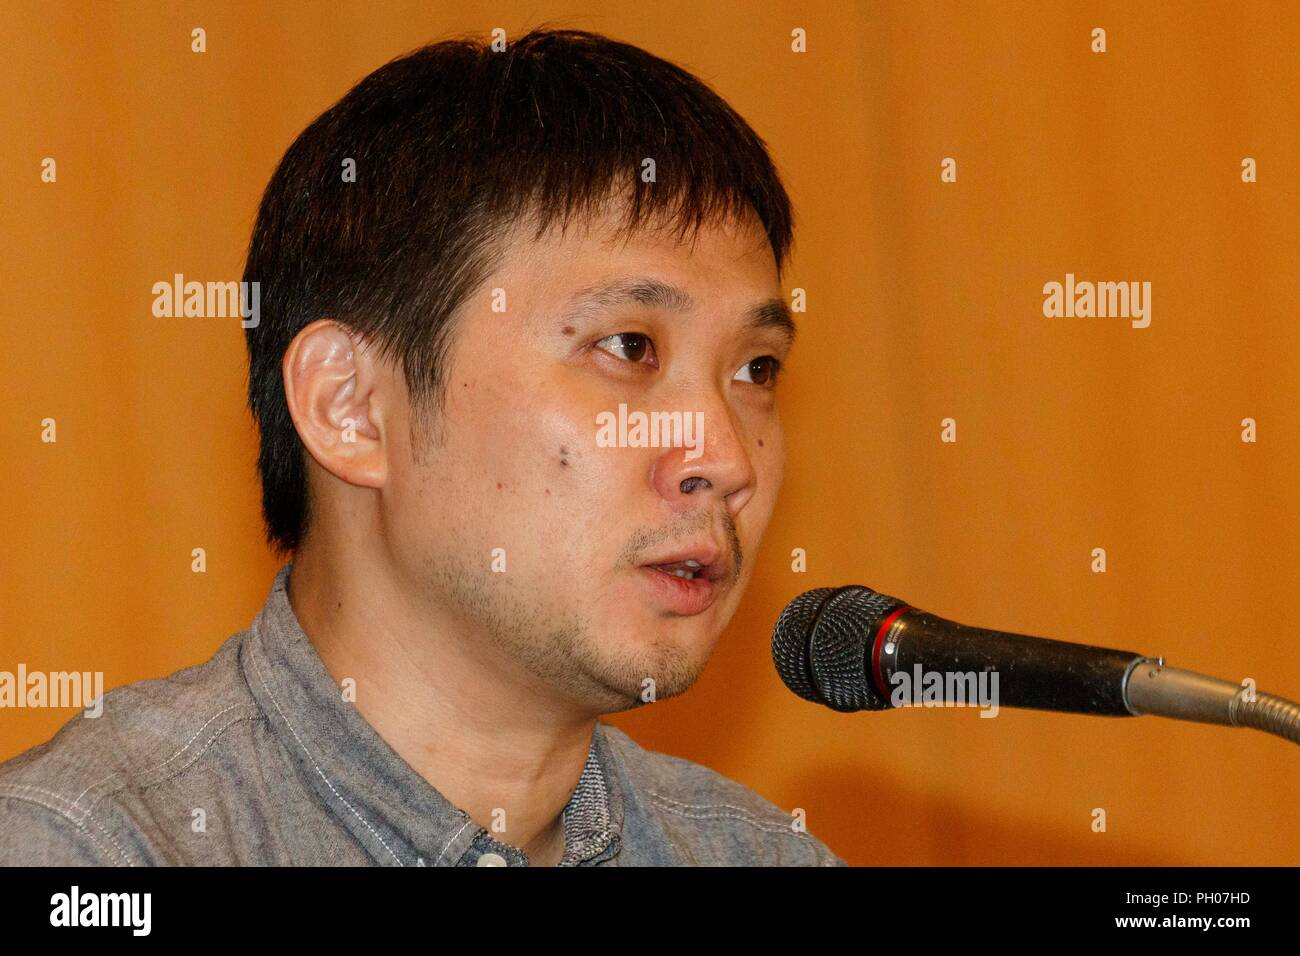 Director Ryusuke Hamaguchi speaks during a Q&A for the film ASAKO I & II (Netemo sametemo) at the Foreign Correspondents' Club of Japan on August 29, 2018, Tokyo, Japan. The Japanese romantic drama was selected to compete for the Palme d'Or this year at the Cannes Film Festival. The film will be released in Japan on September 1. (Photo by Rodrigo Reyes Marin/AFLO) Stock Photo